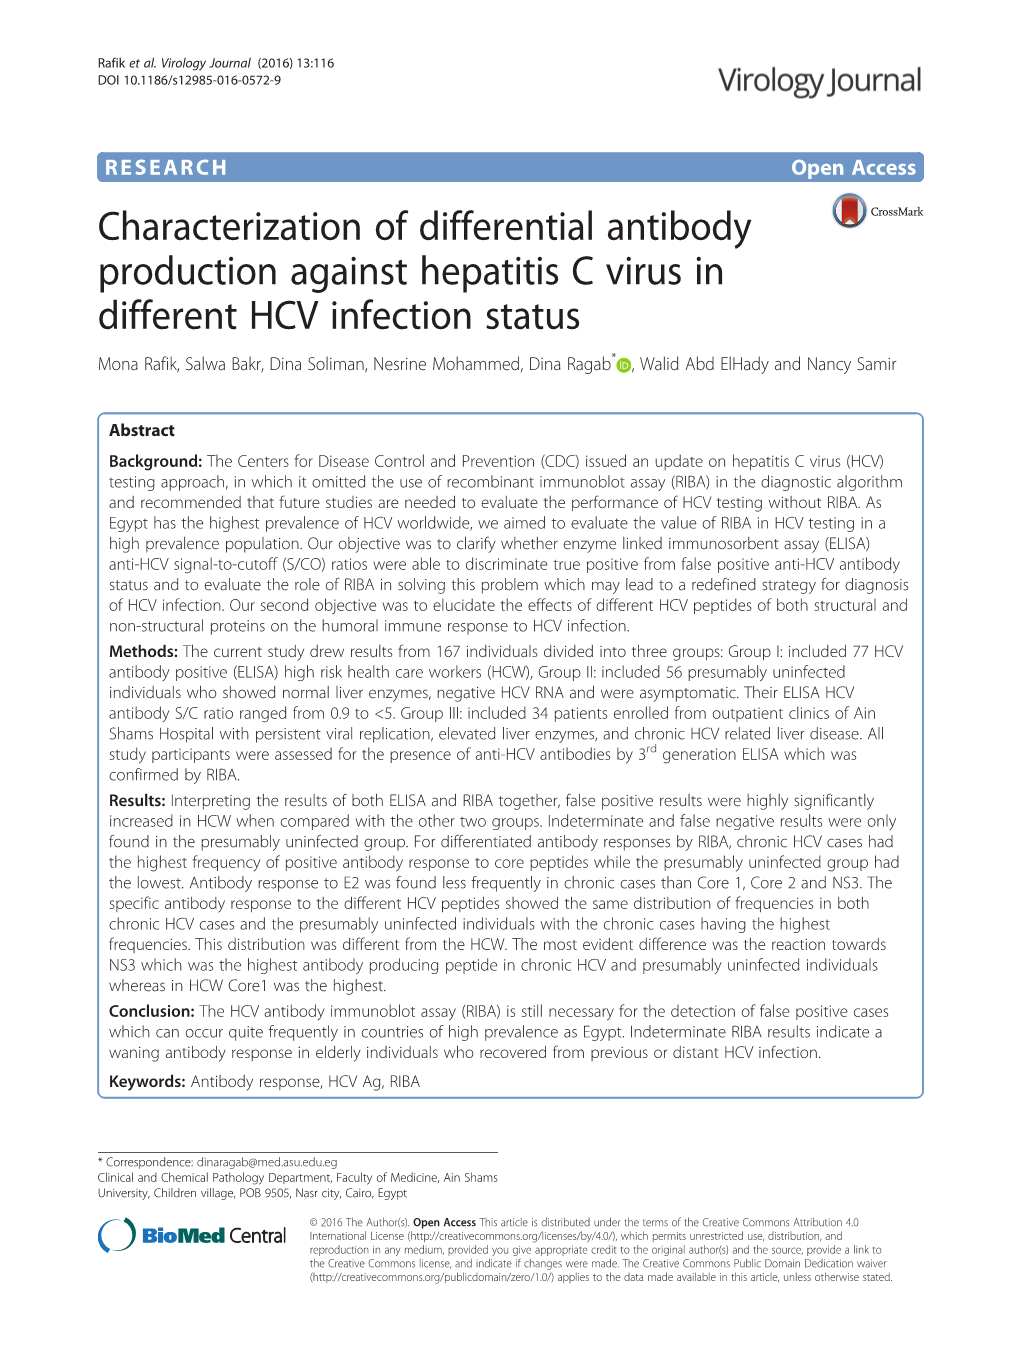 Characterization of Differential Antibody Production Against